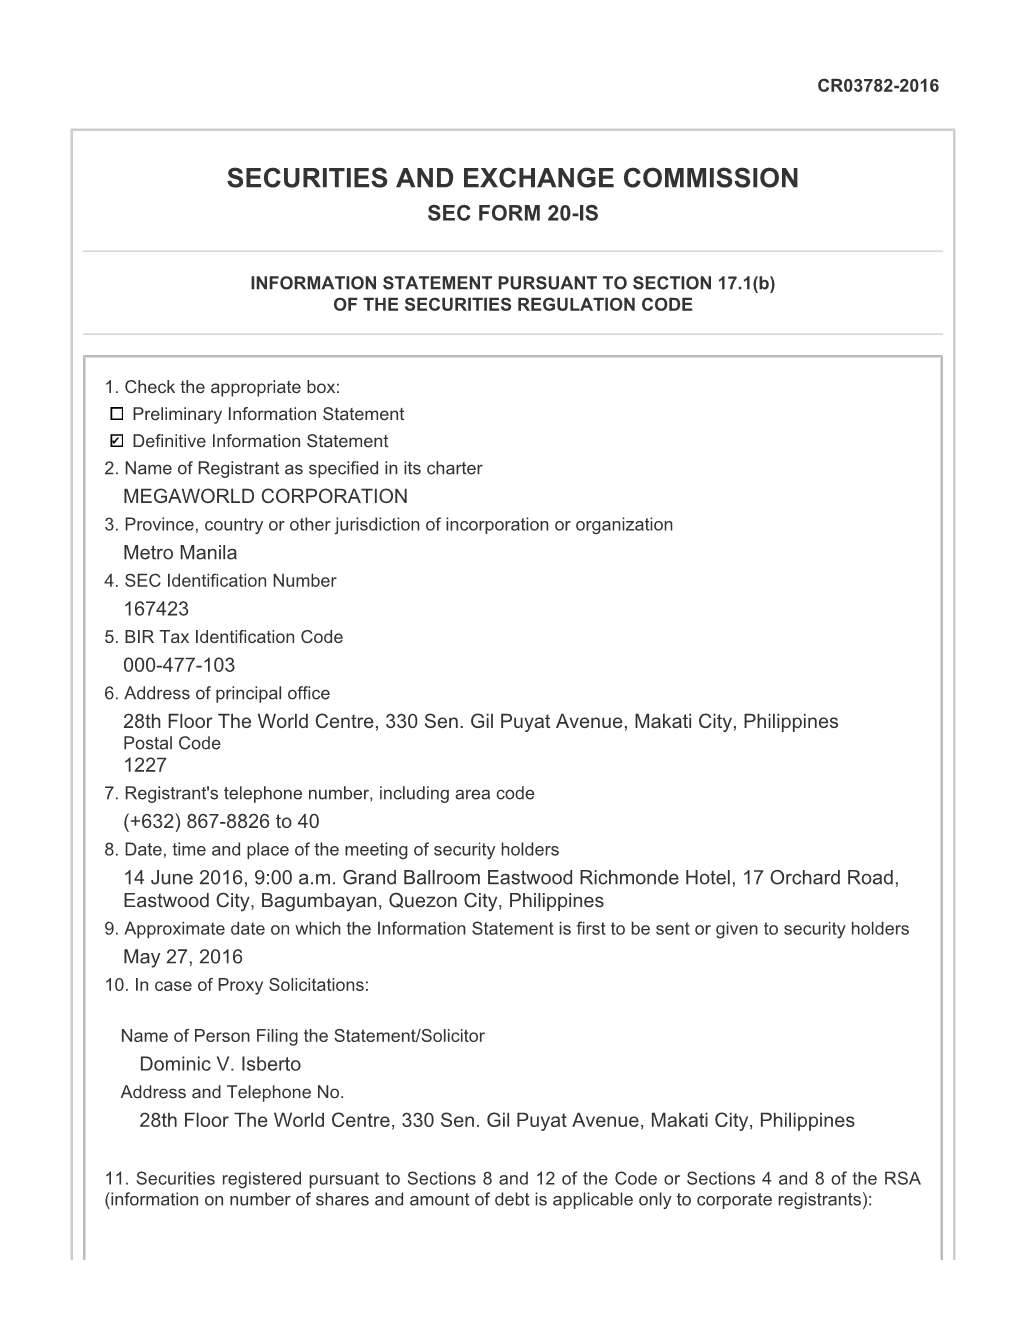 Securities and Exchange Commission Sec Form 20-Is